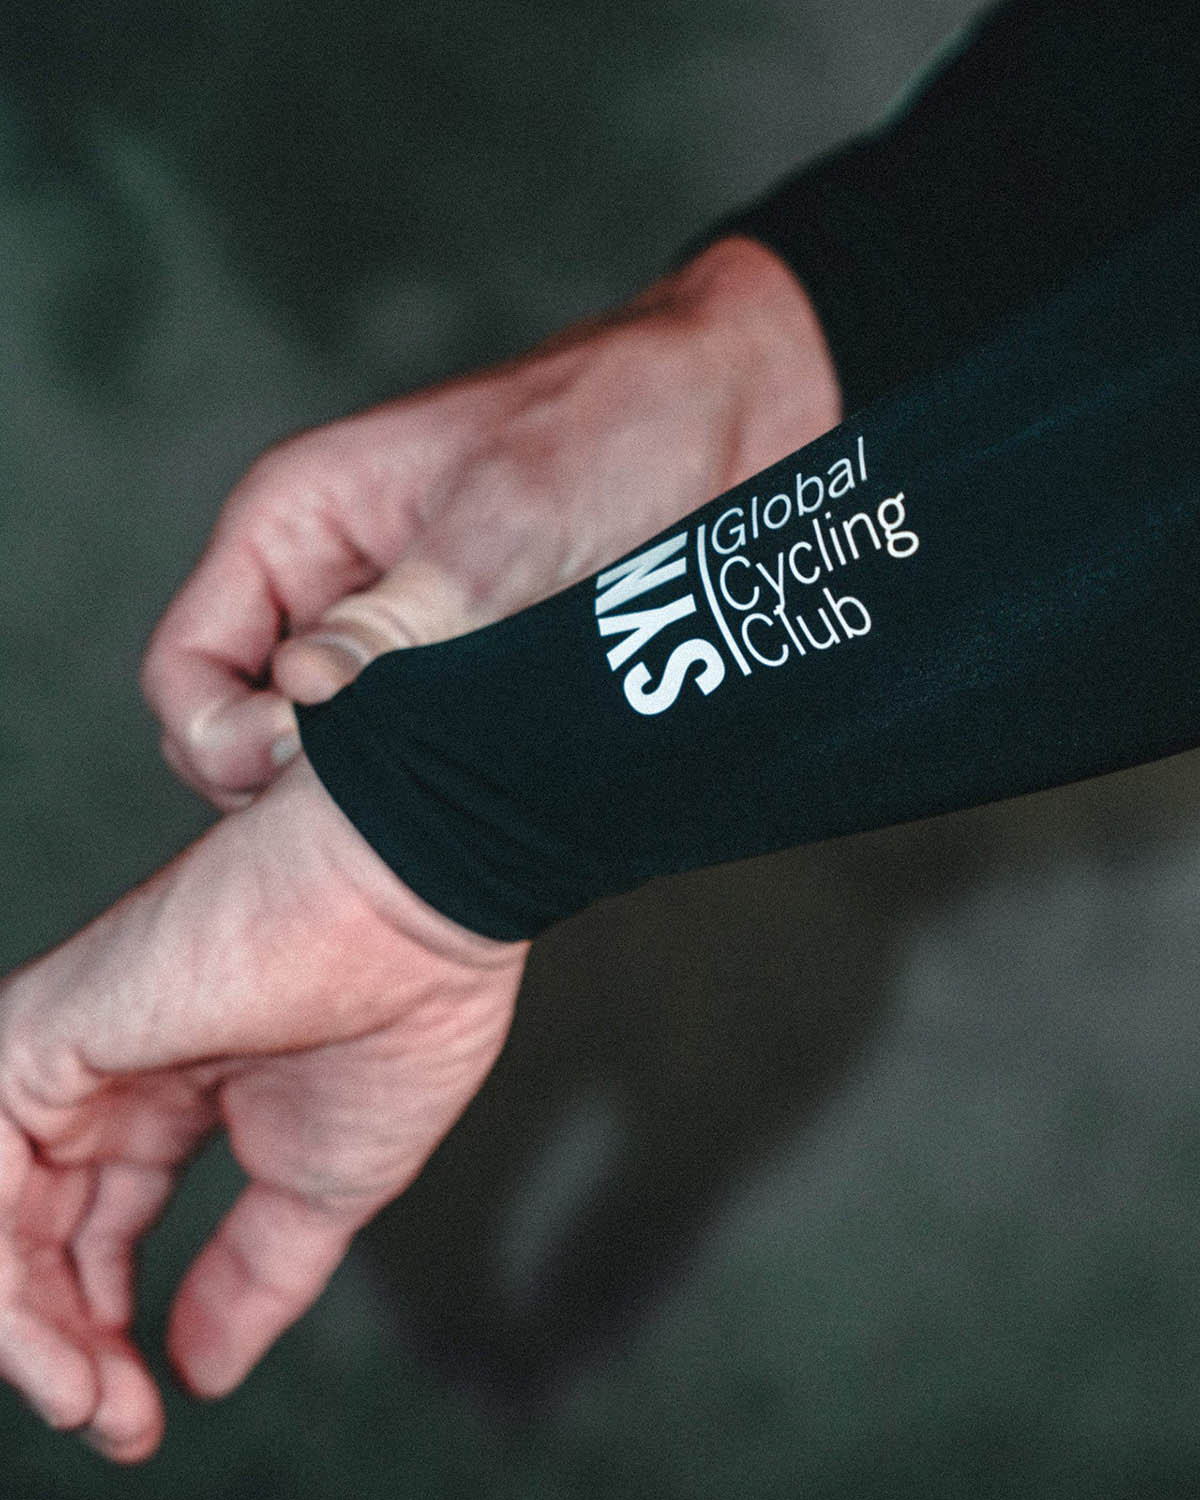 Syndicate Thermal Arm Warmers